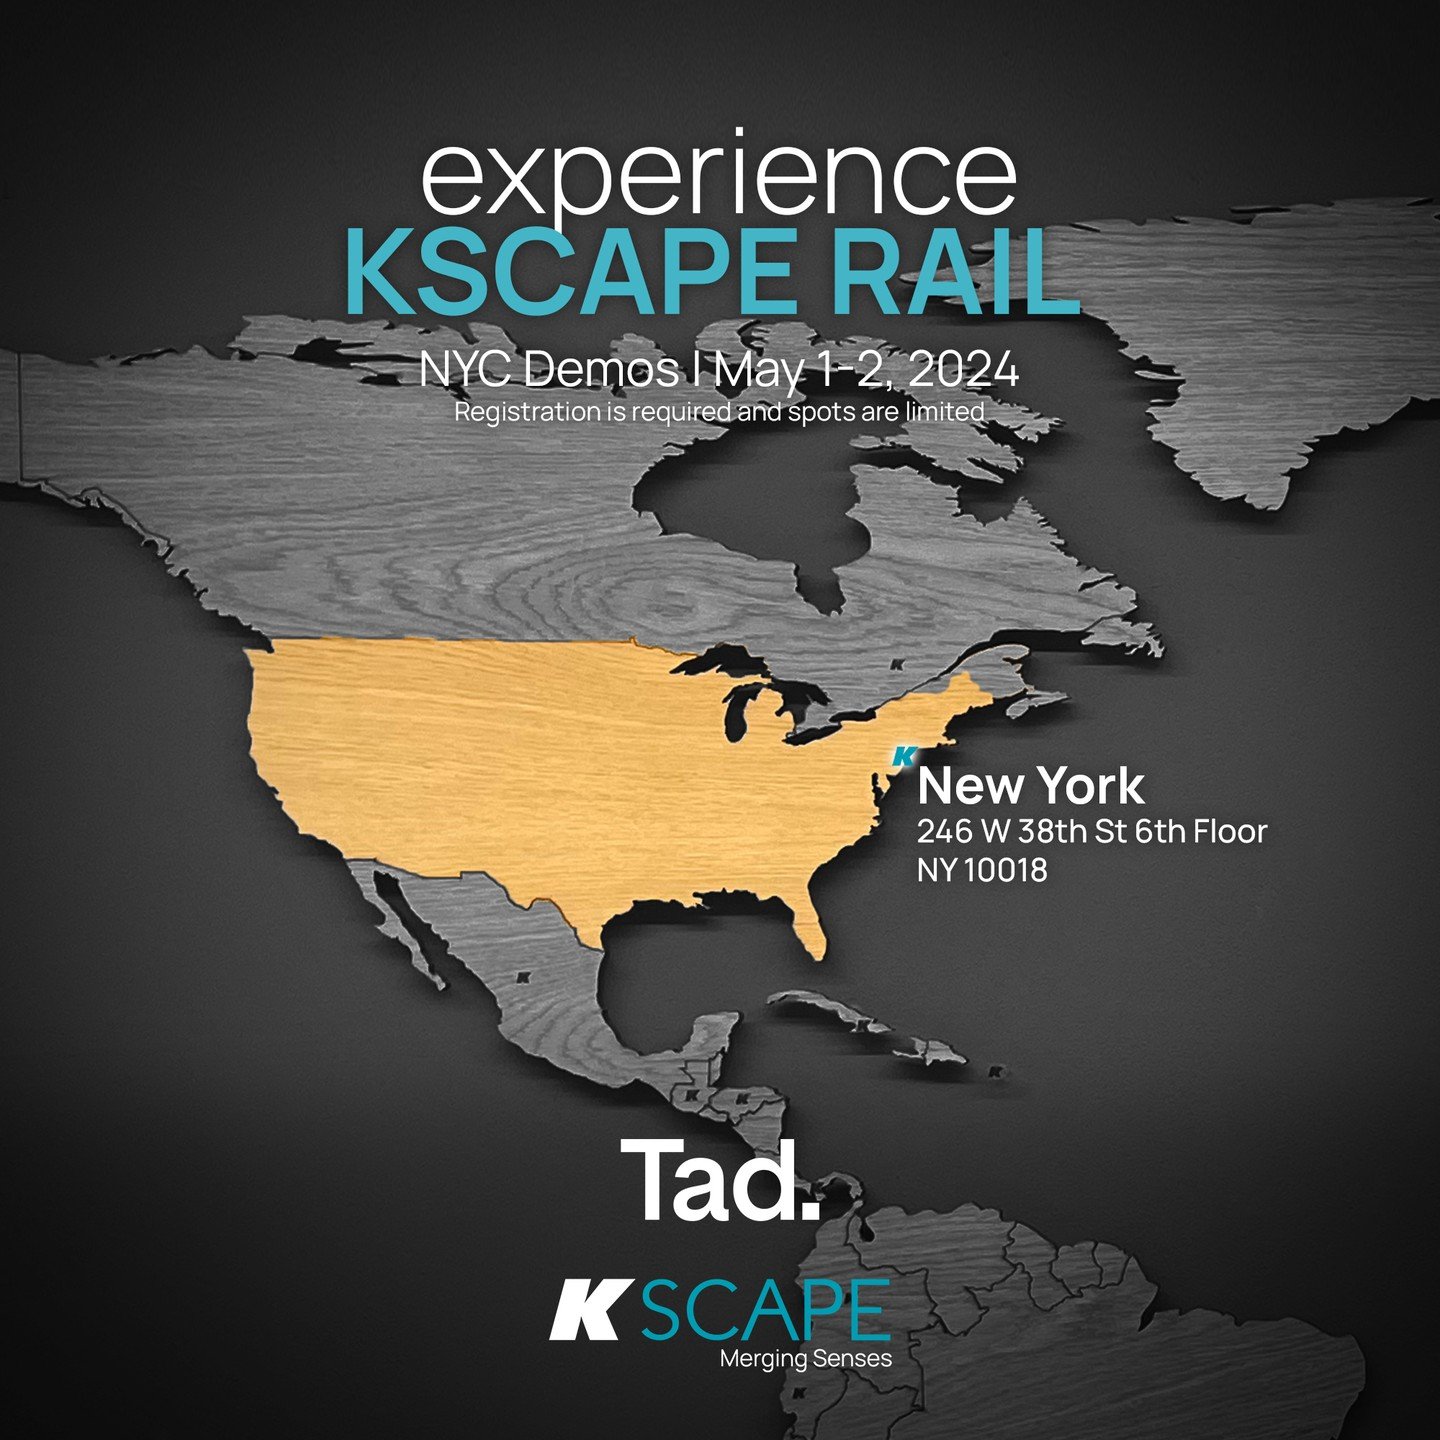 Join K-array USA for live demonstrations of the K SCAPE RAIL system on Wednesday, May 1st, and Thursday, May 2nd.

Registration is required and spots are limited, so be sure to secure your preferred time slot by registering today. DM us for a registr